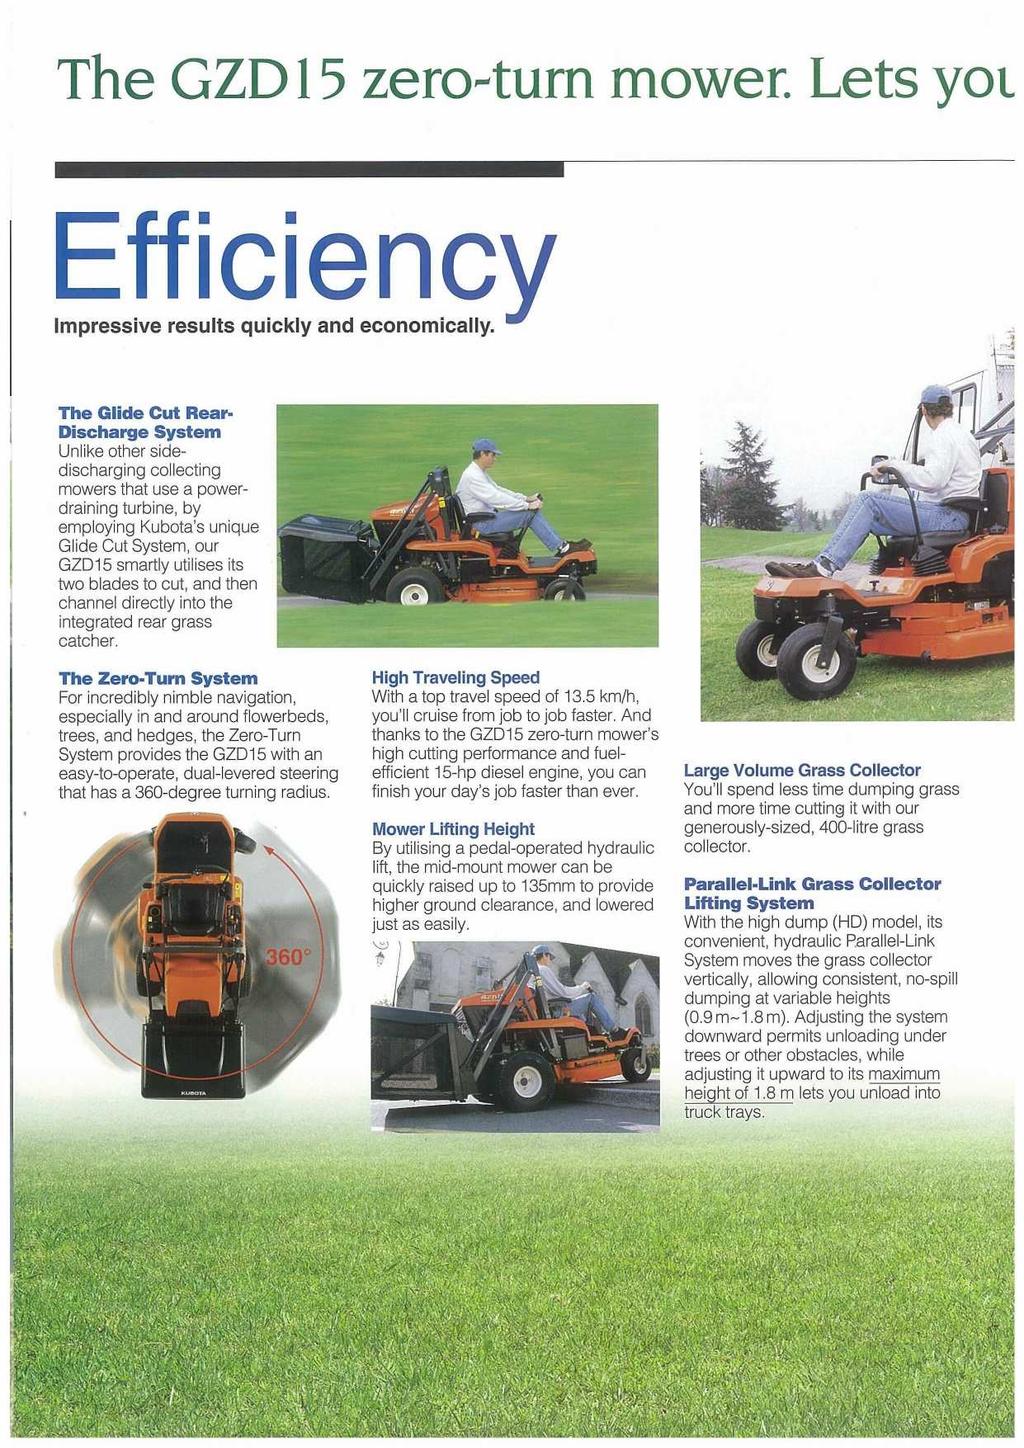 The GZD 15 zero turn mower. Lets yol Effici Impressive results quickly and economically.